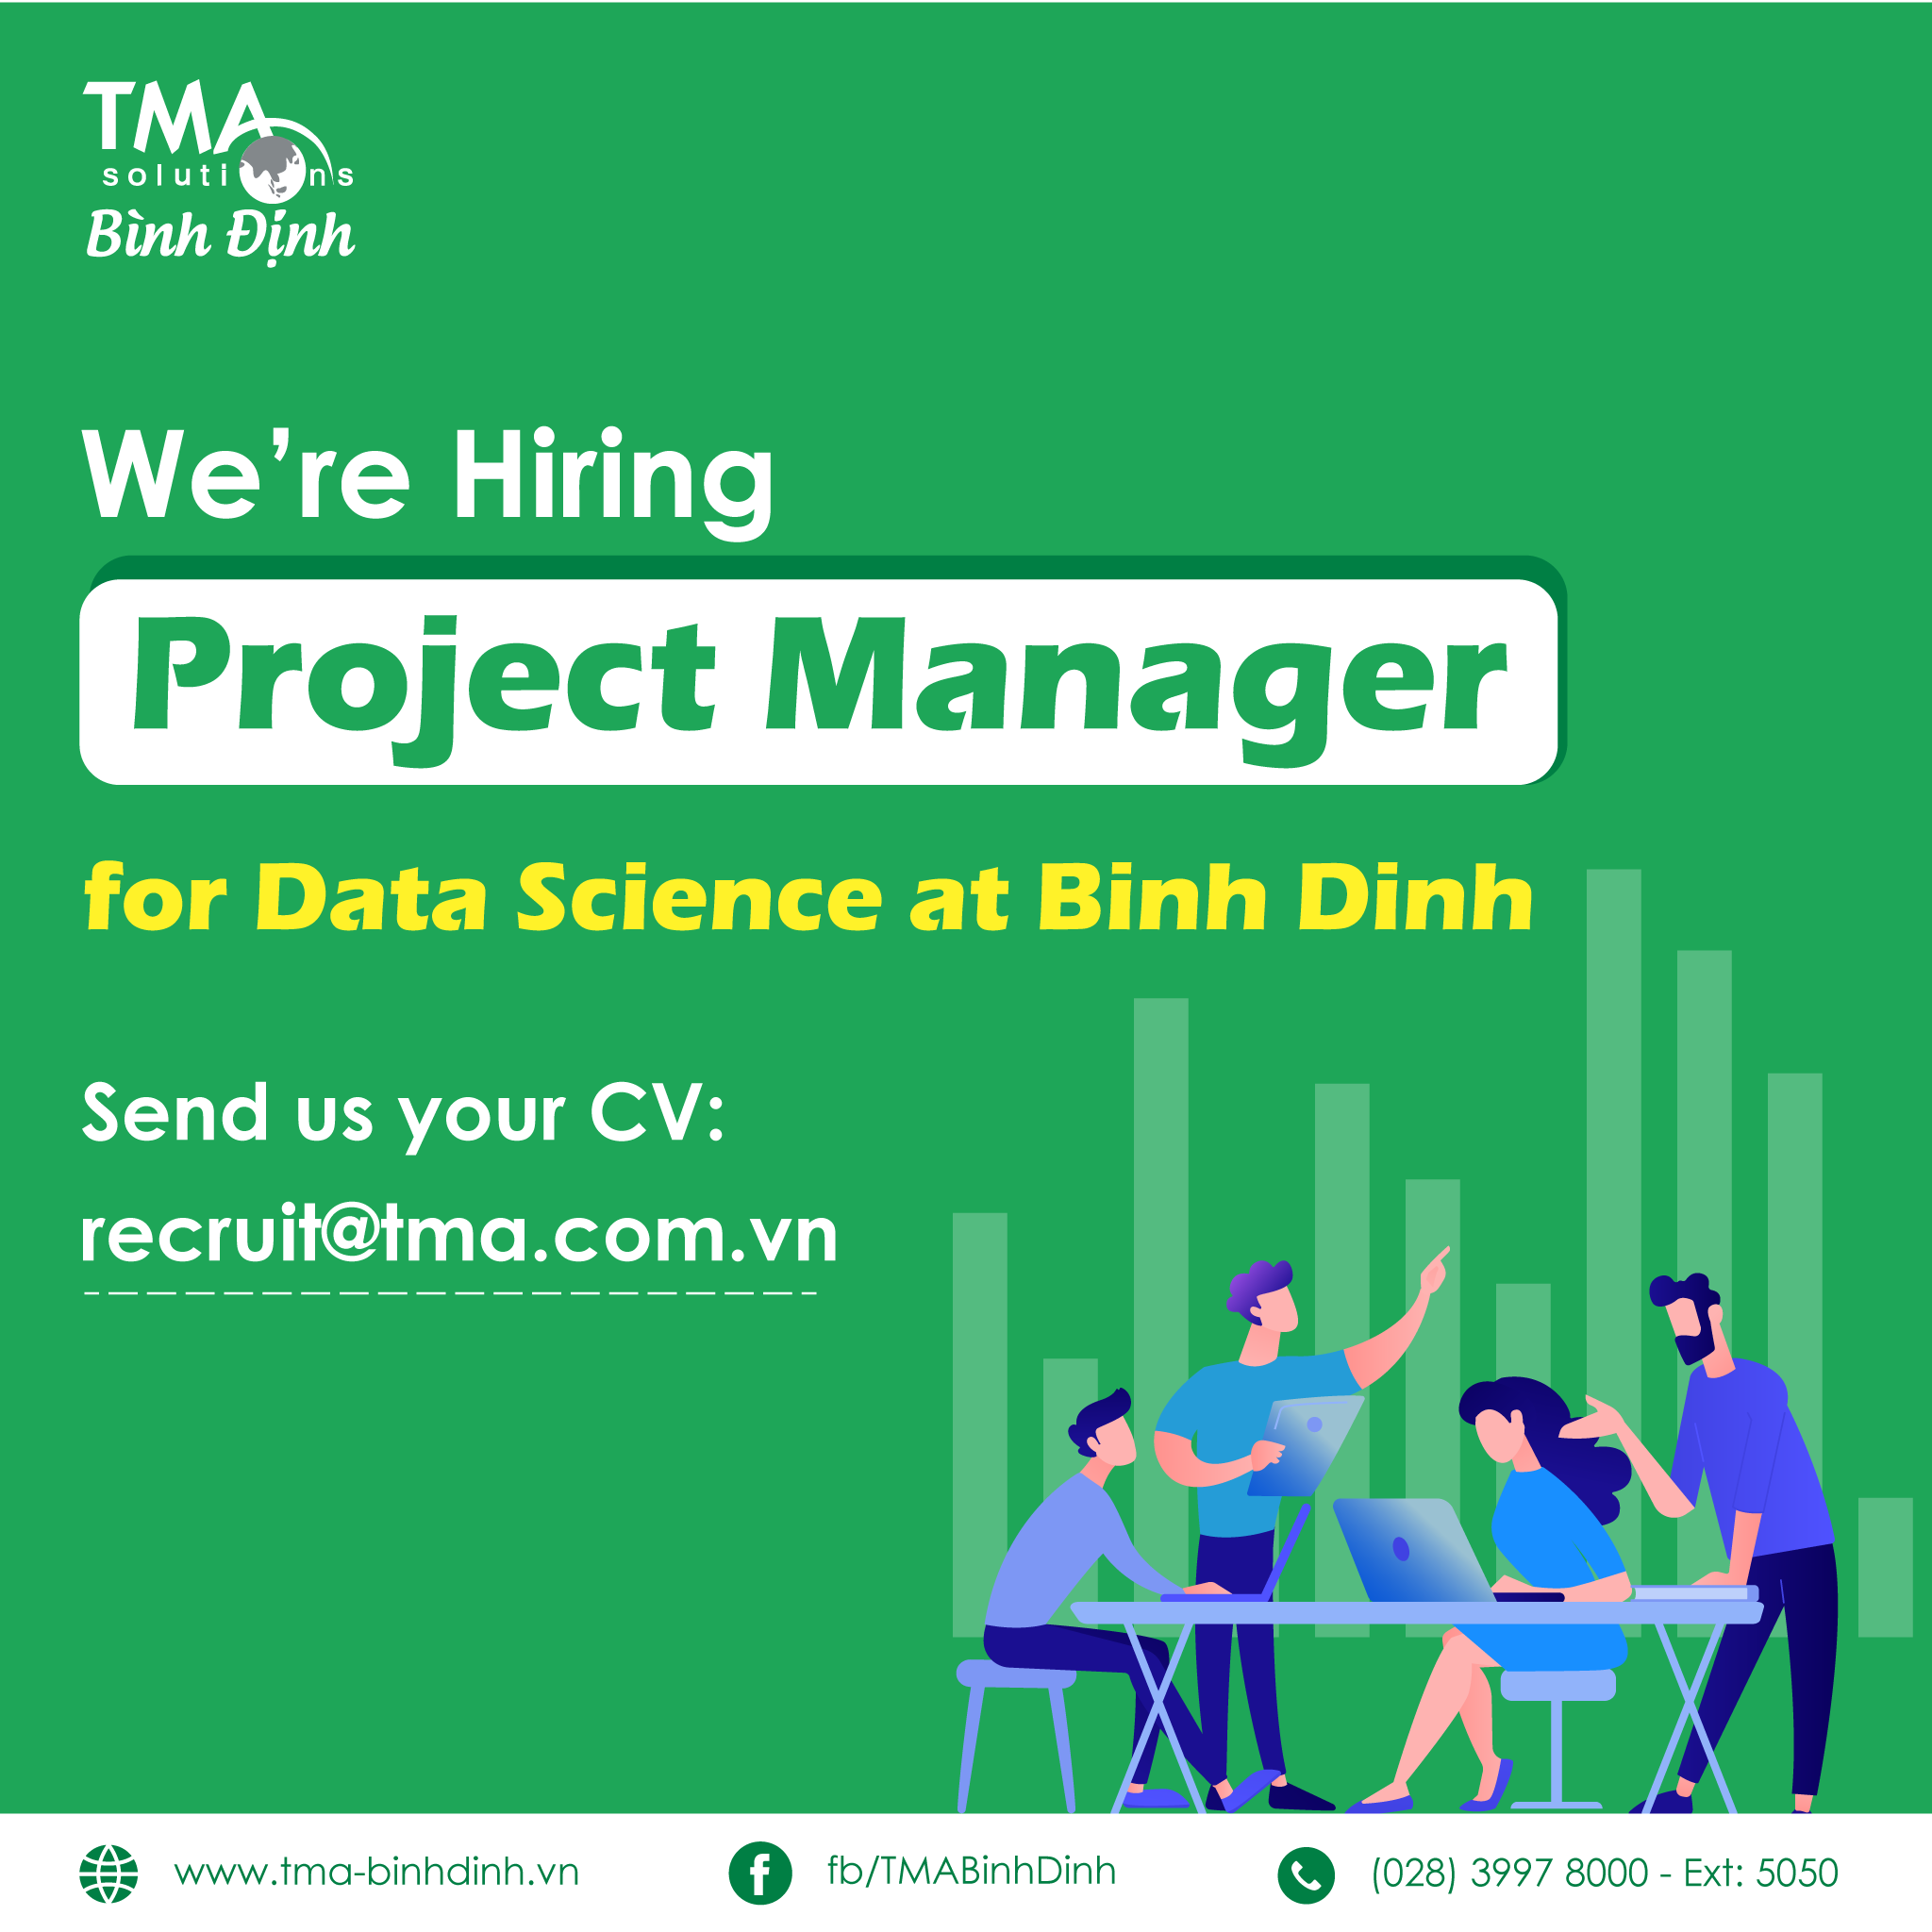 TMA Solutions is hiring Project Manager for Data Science at Binh Dinh